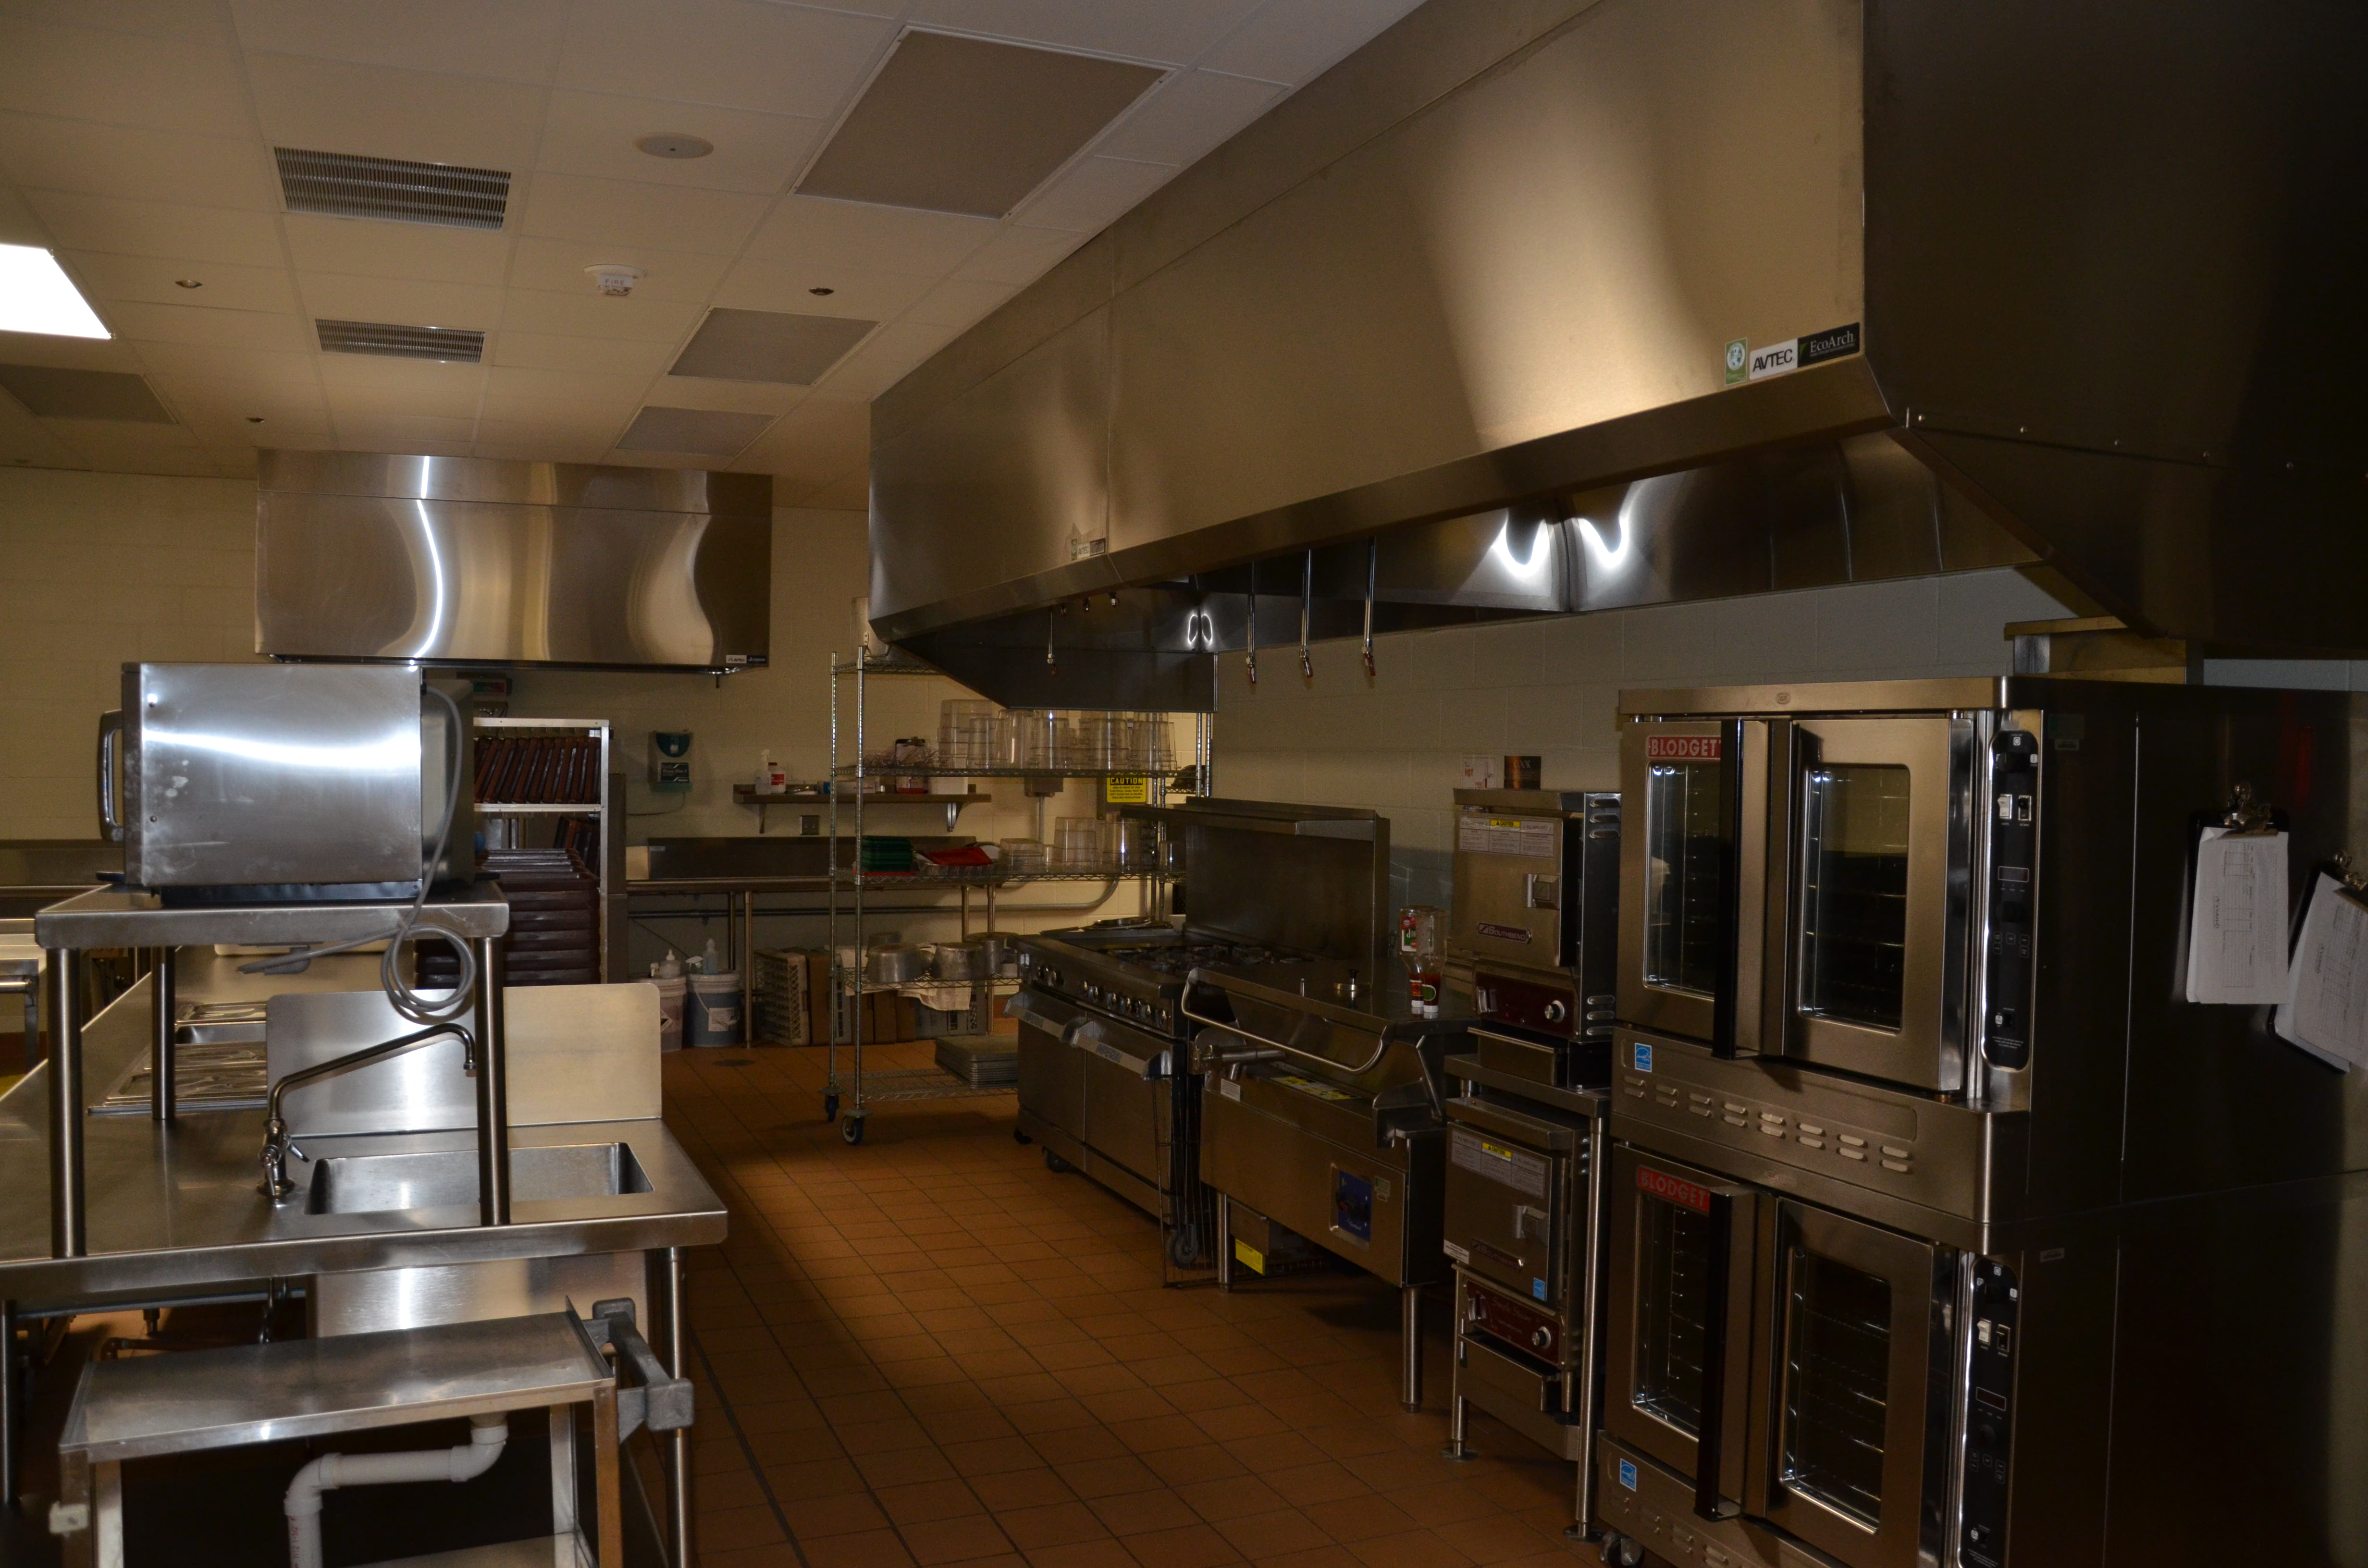 Green Lake County Government Center kitchen facility